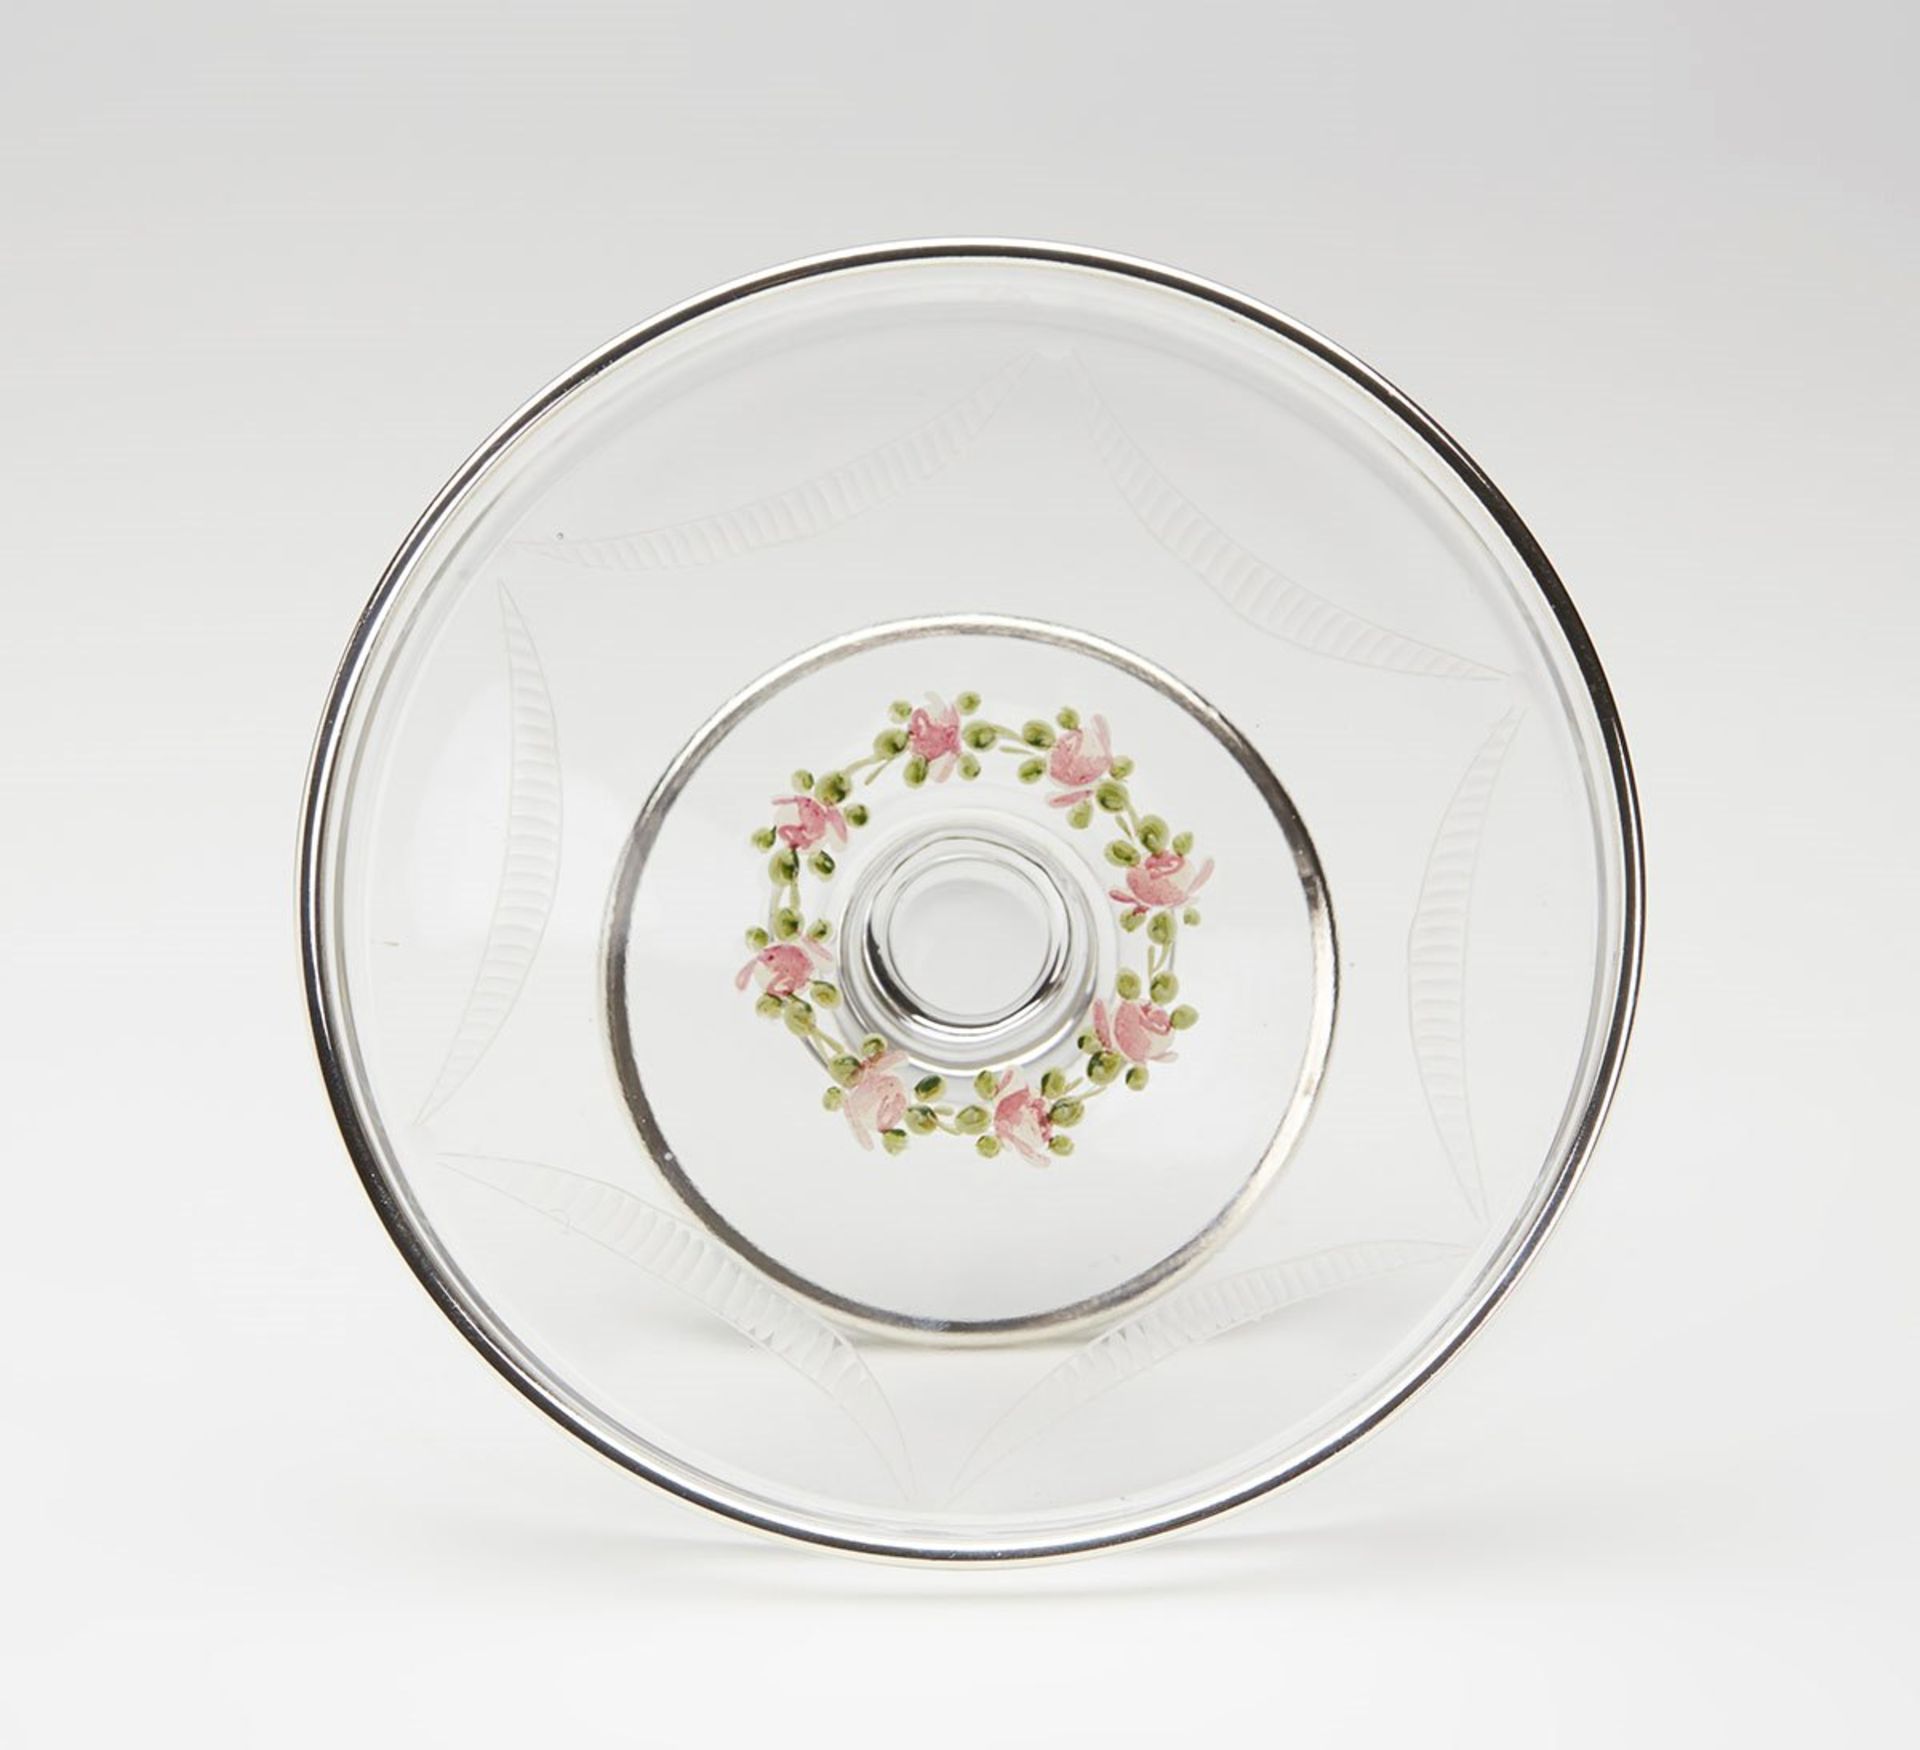 Antique Silver Overlay Floral Enamel Glass Tazza 19Th C. - Image 2 of 6